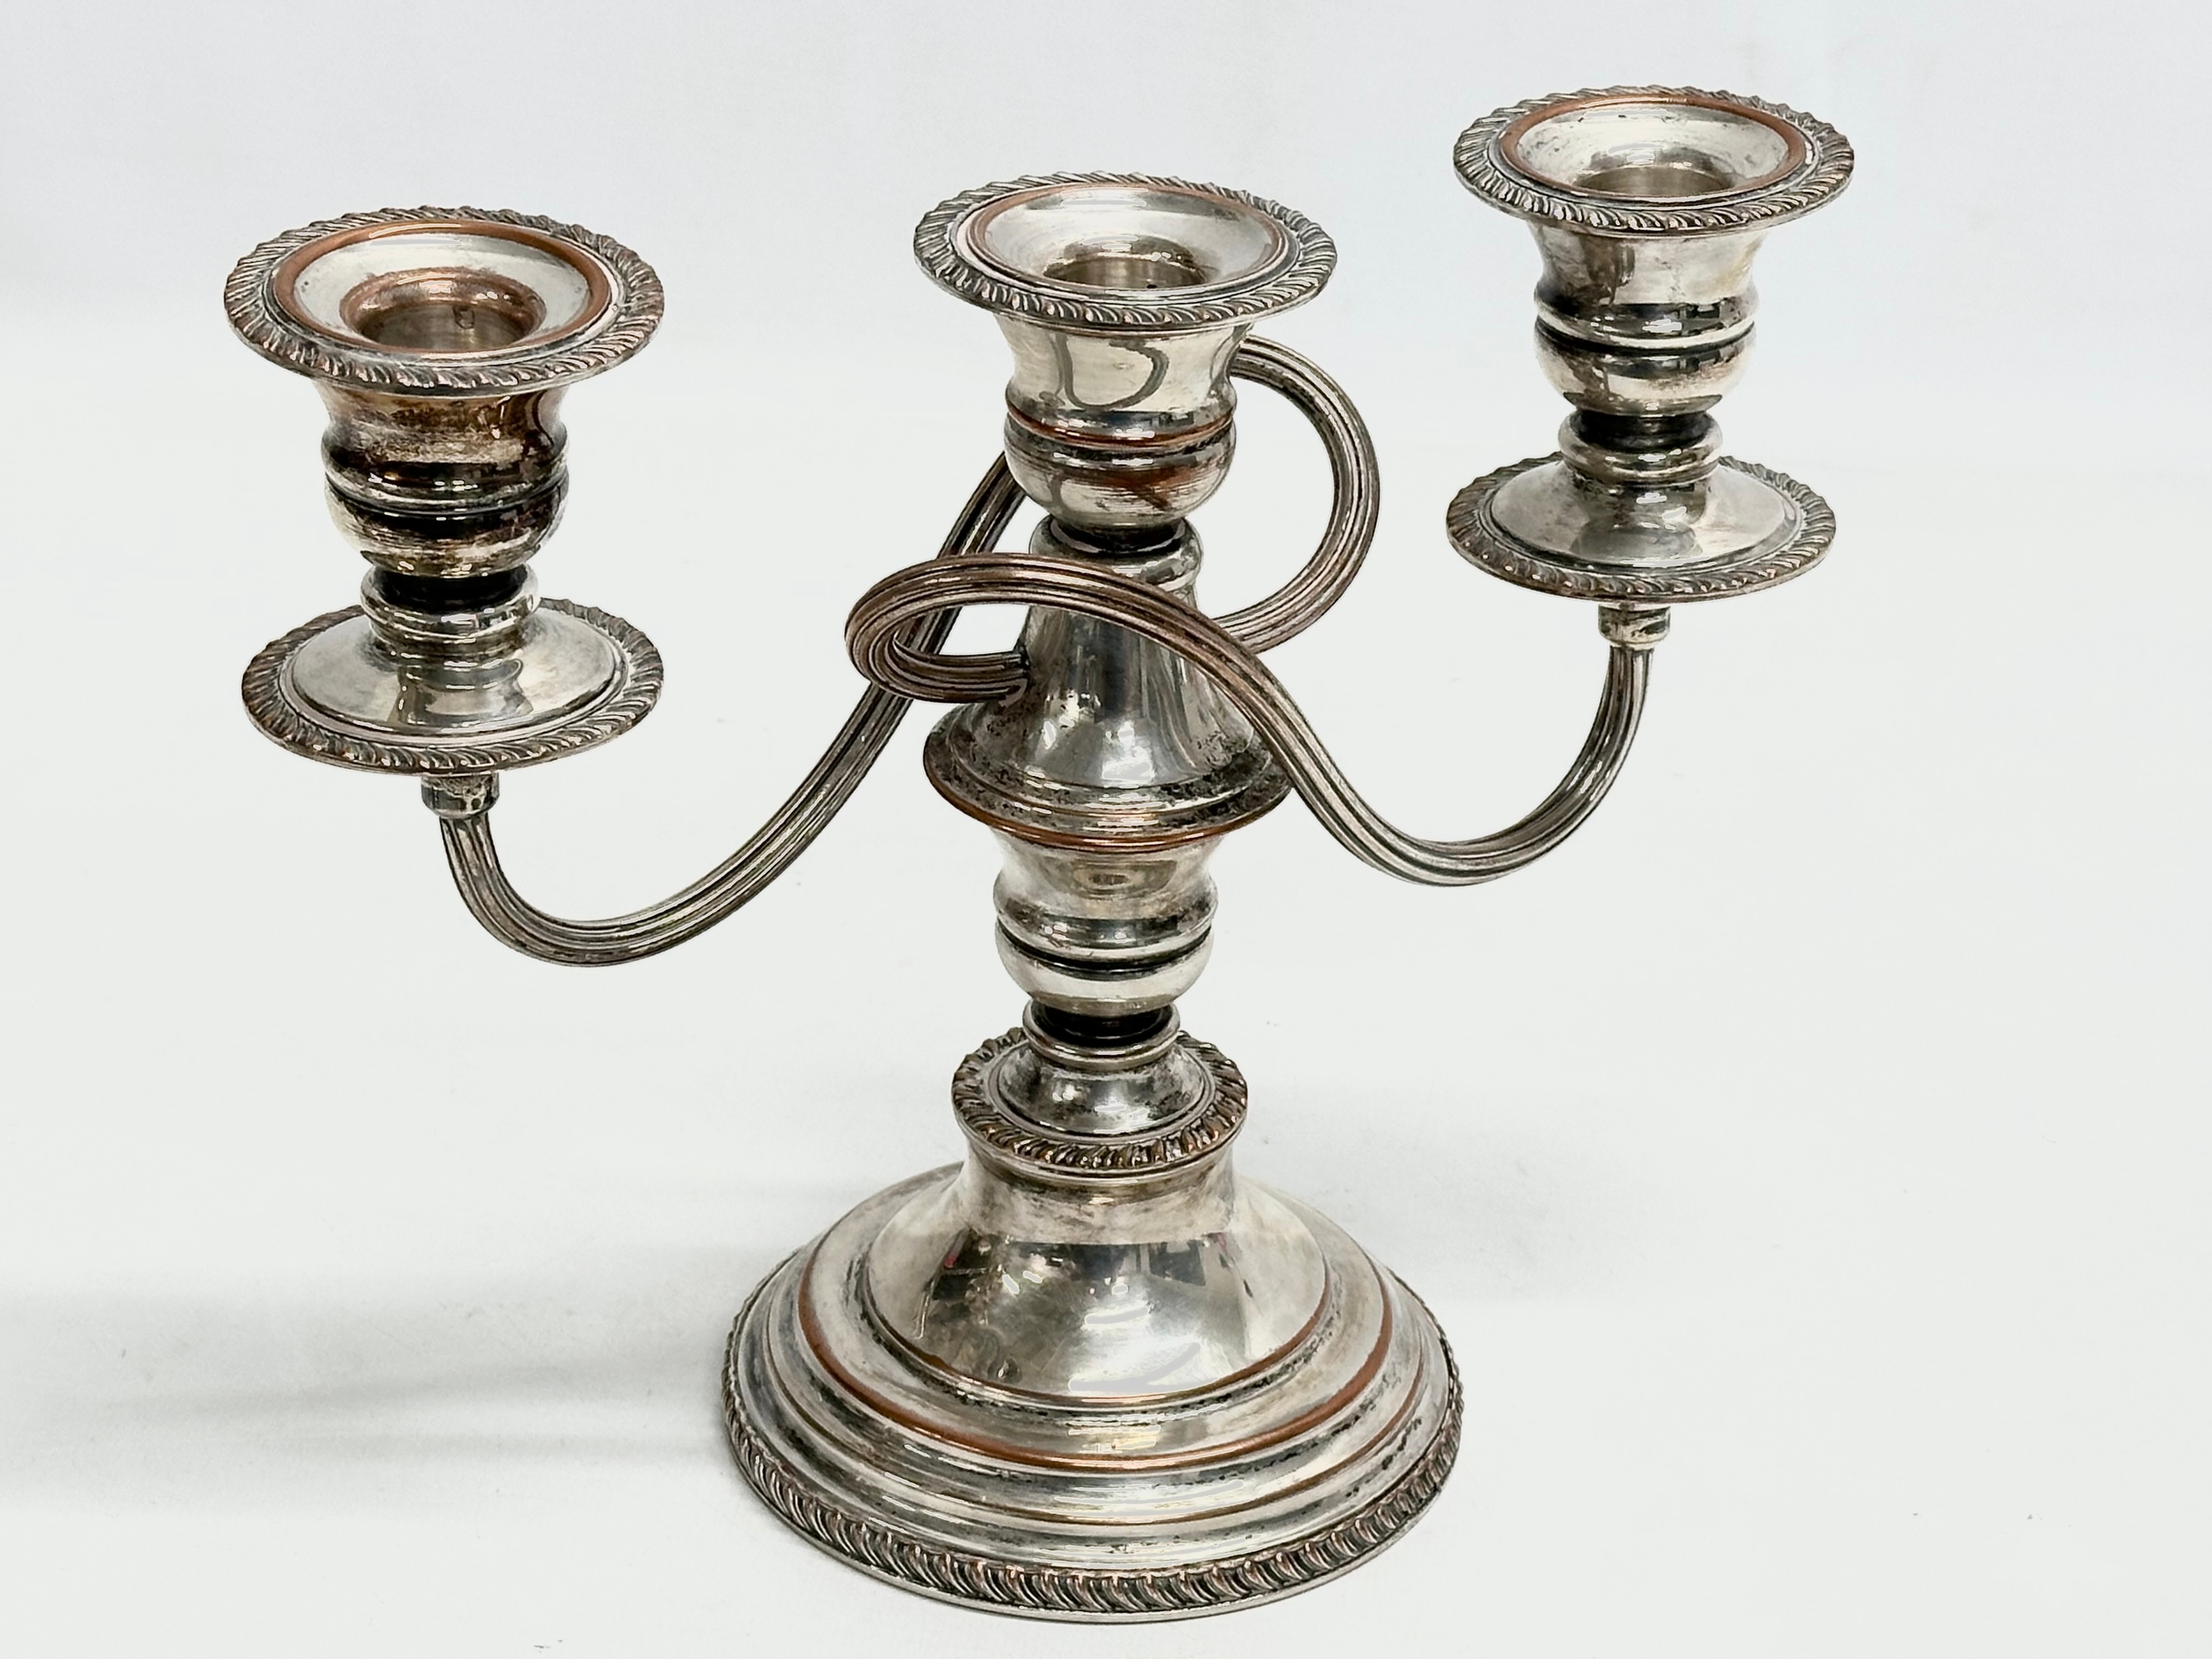 A pair of good quality Edwardian silver plated candelabras. 24x19.5cm - Image 2 of 3